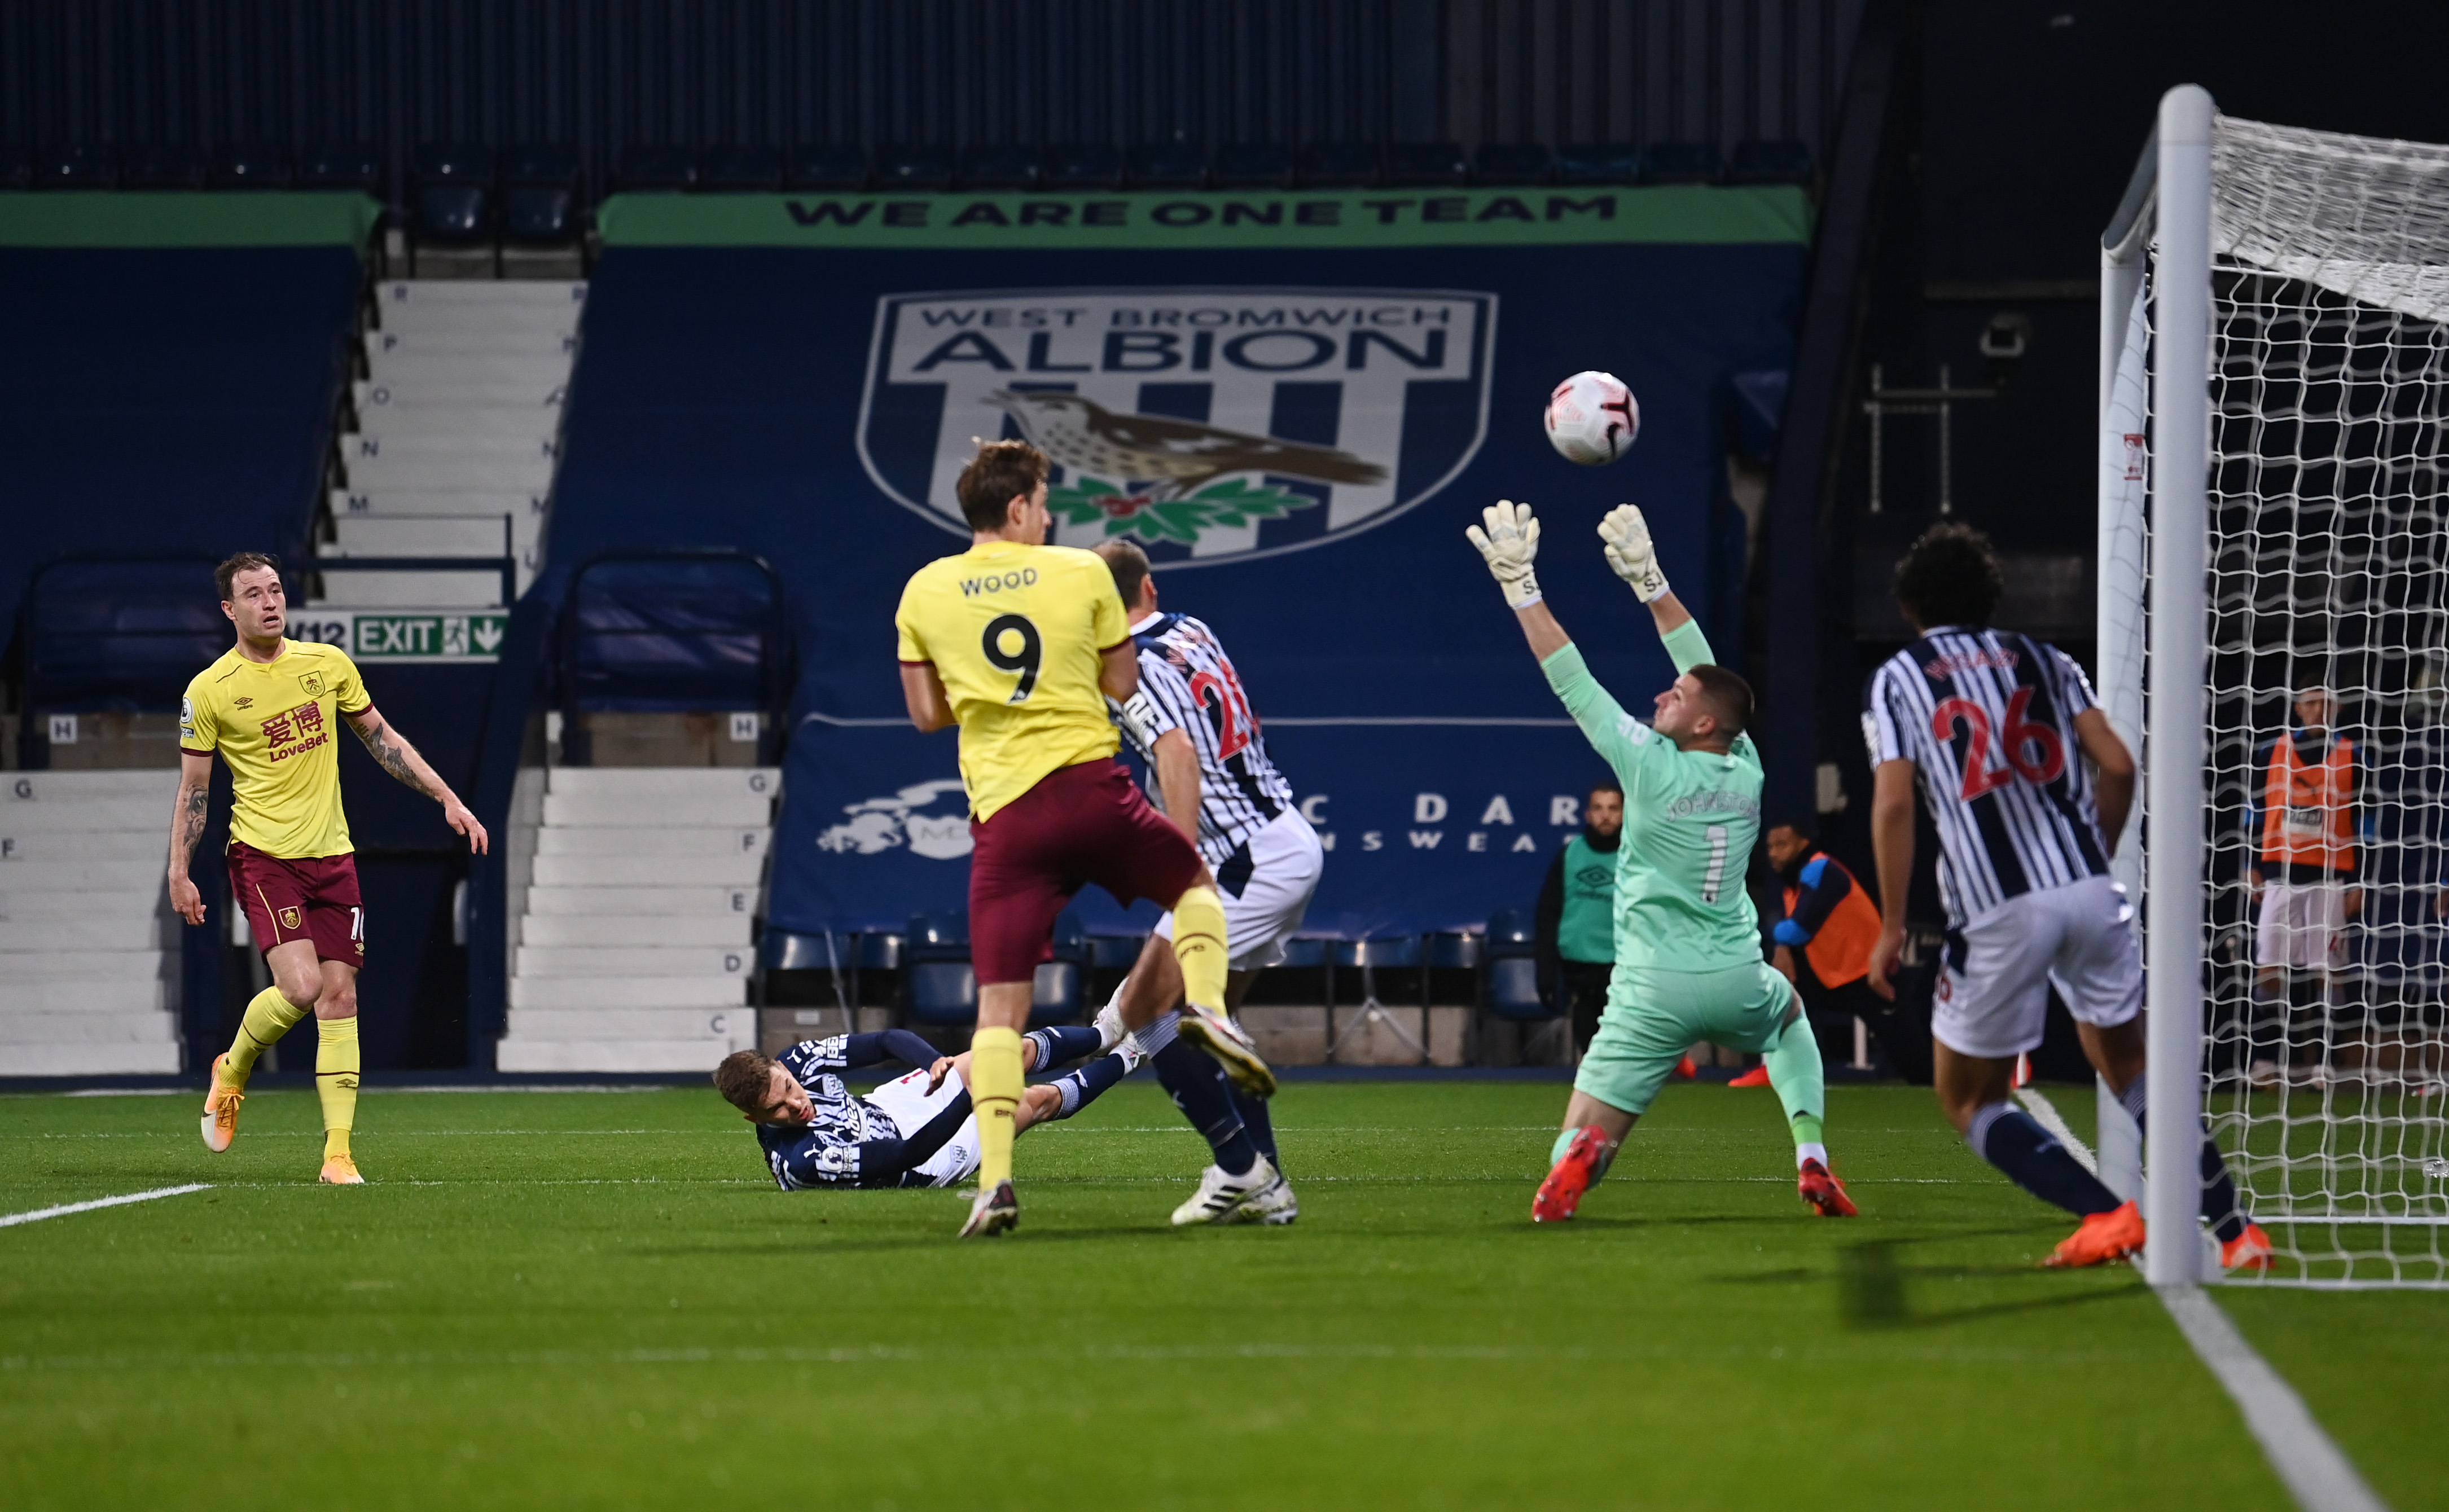 West Bromwich Albion drew 0-0 with Burnley in a Premier League pay-per-view match 